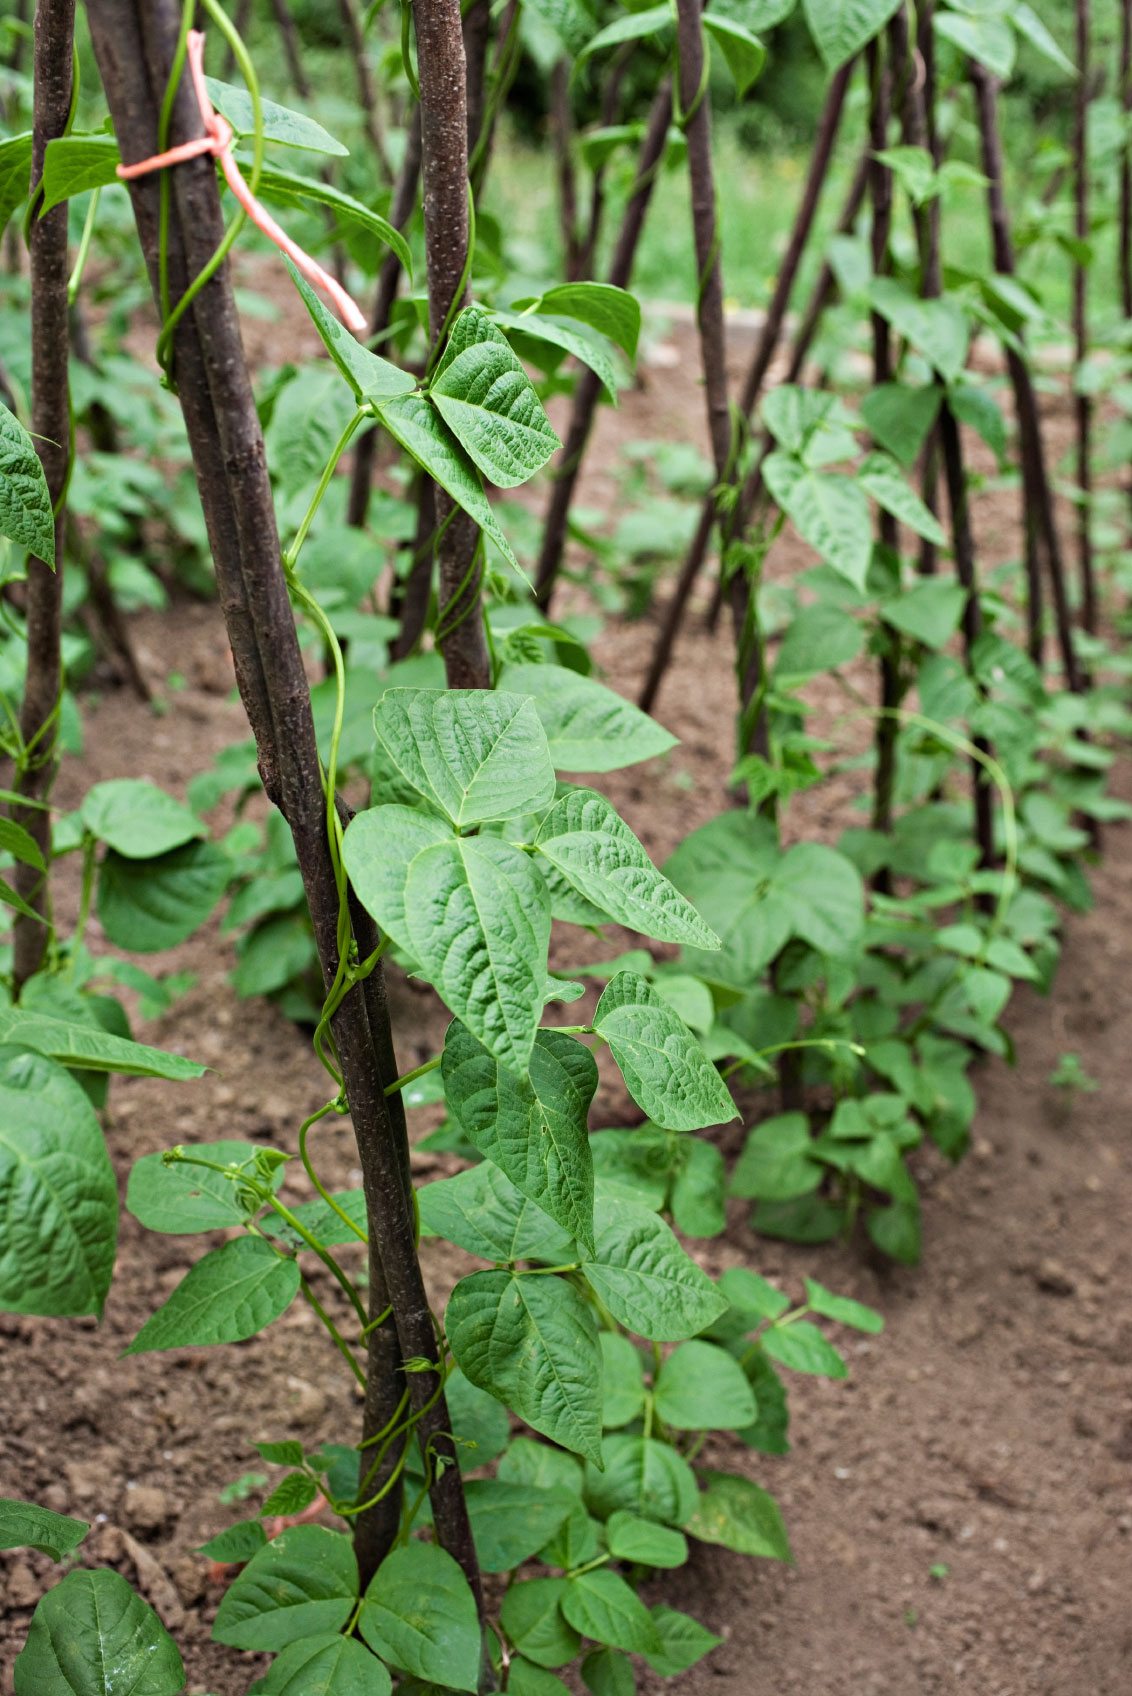 How To Stake Pole Beans - Learn More About Pole Bean Supports